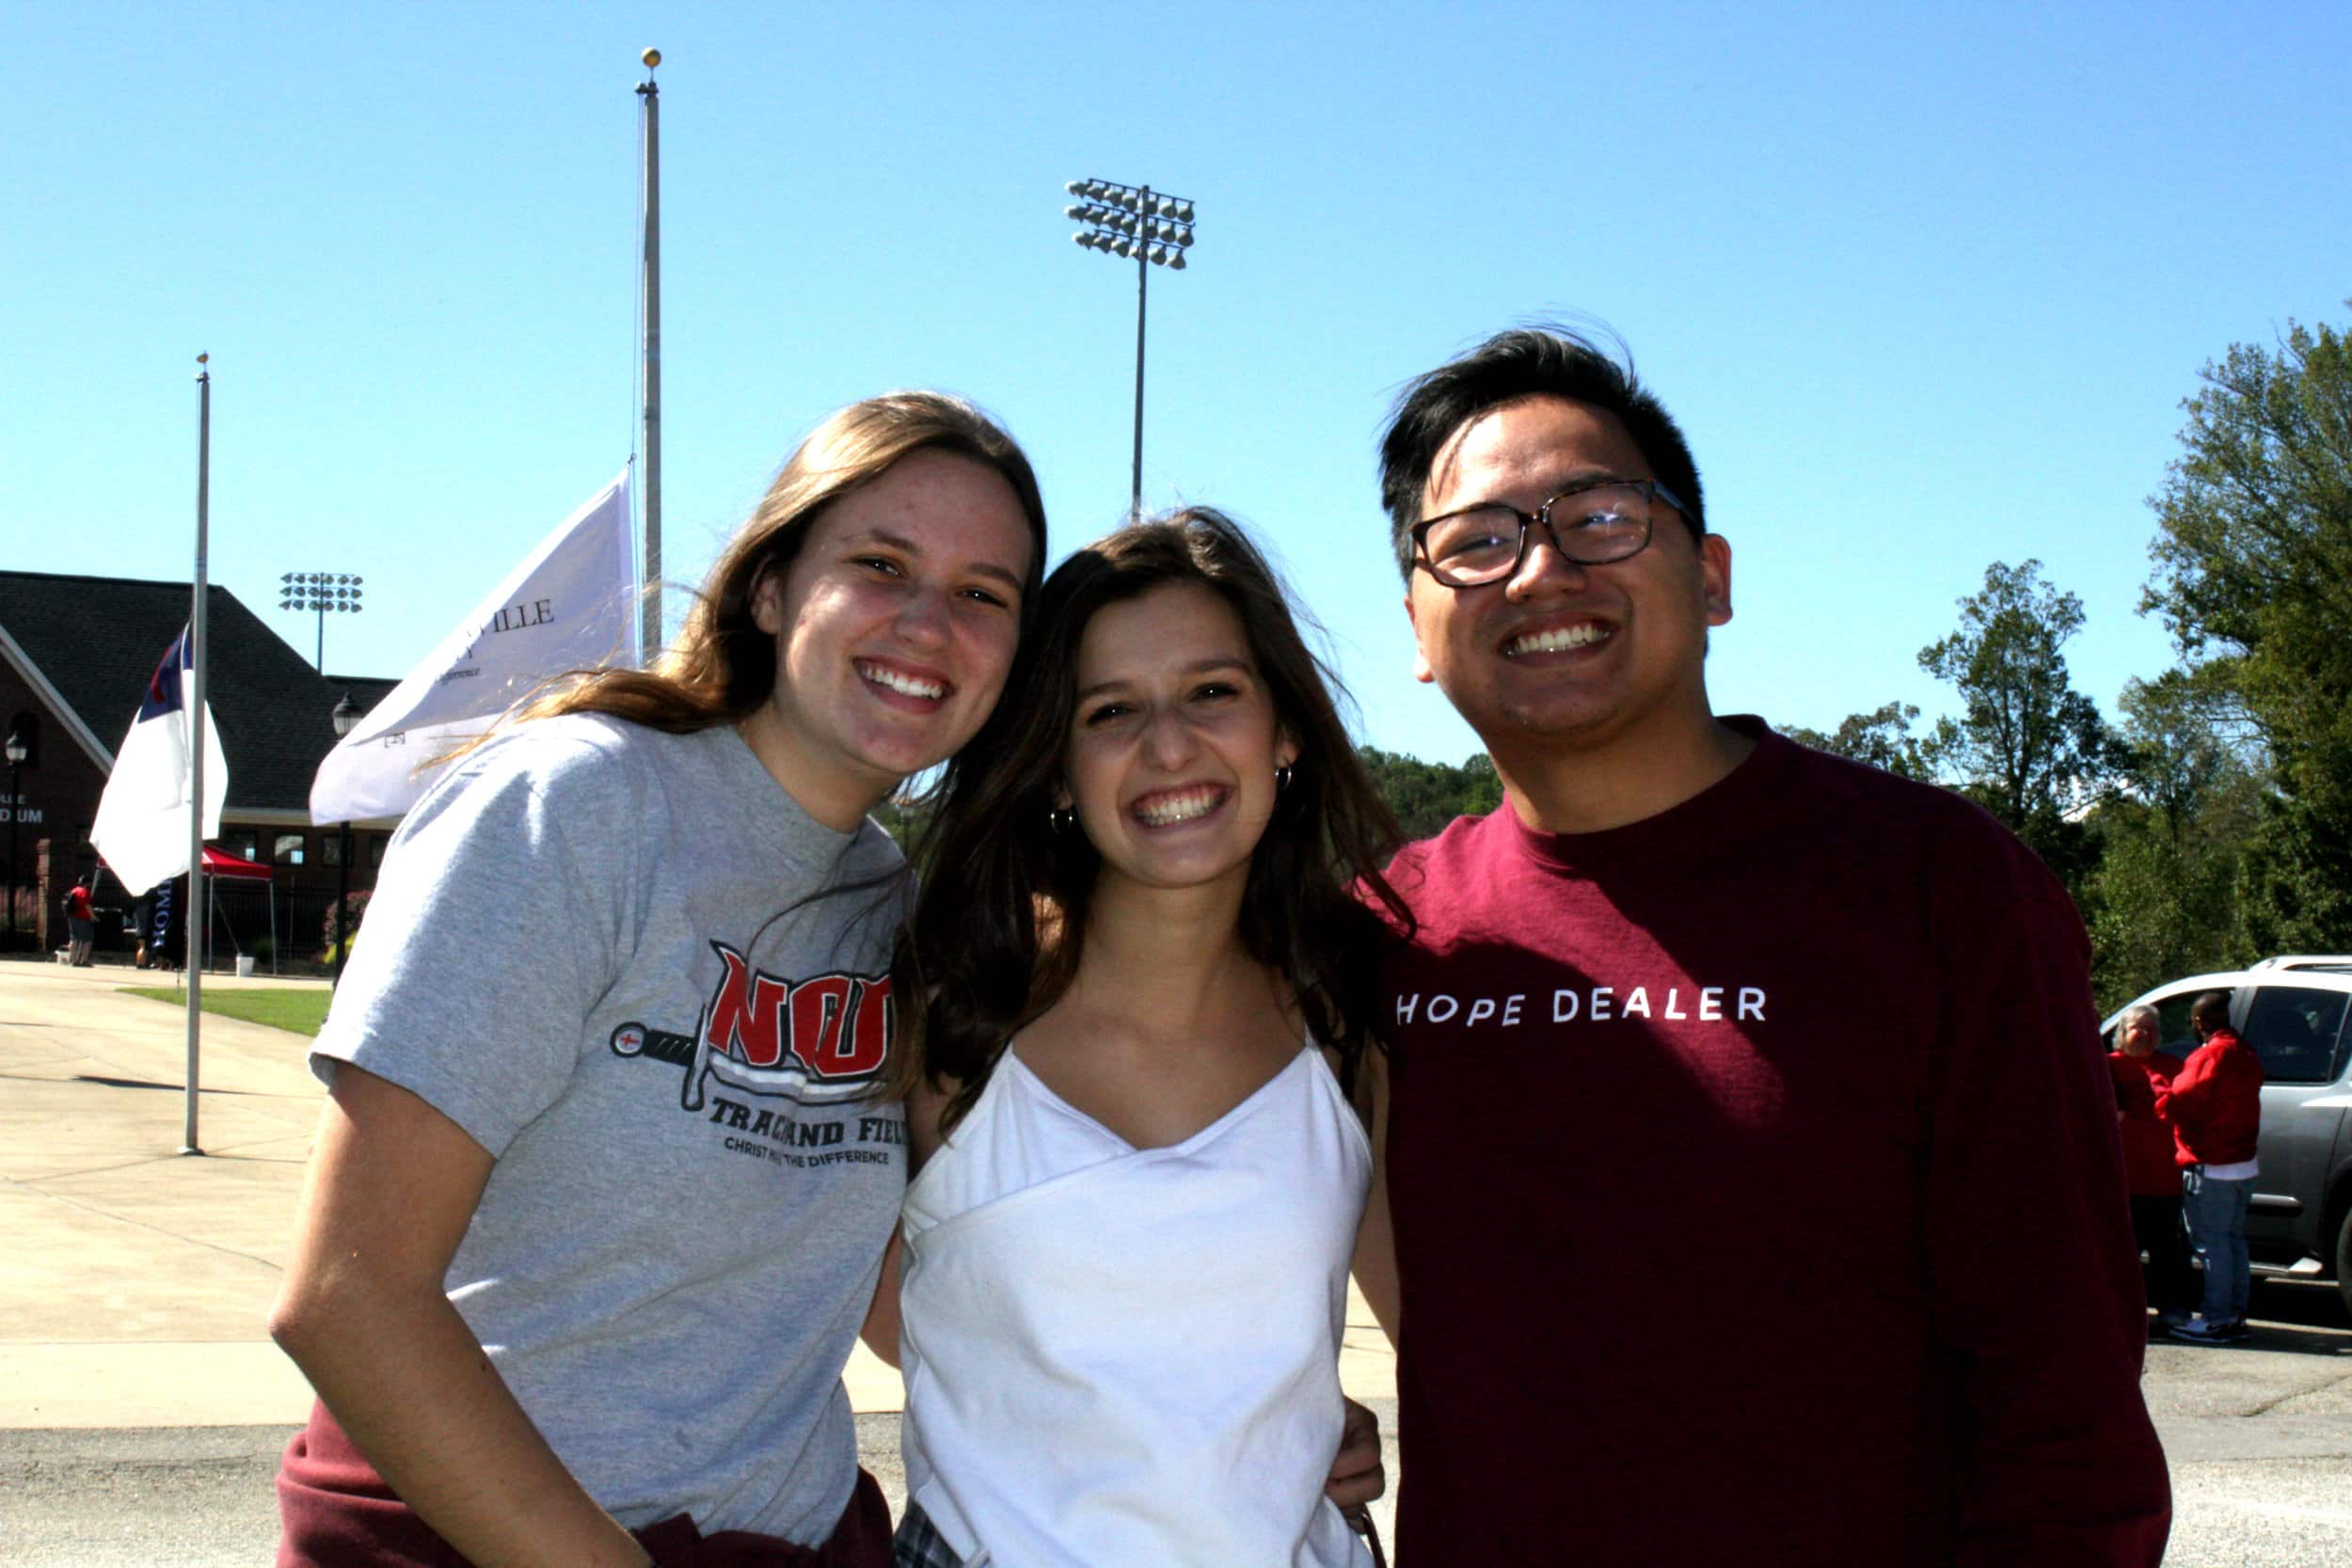 From left to right, students Caroline Smith (Sophomore), Abbey Blackwood (Senior) and Kieffer Mendoza (Alumni) enjoy the tailgate as they wait for the parade to start.